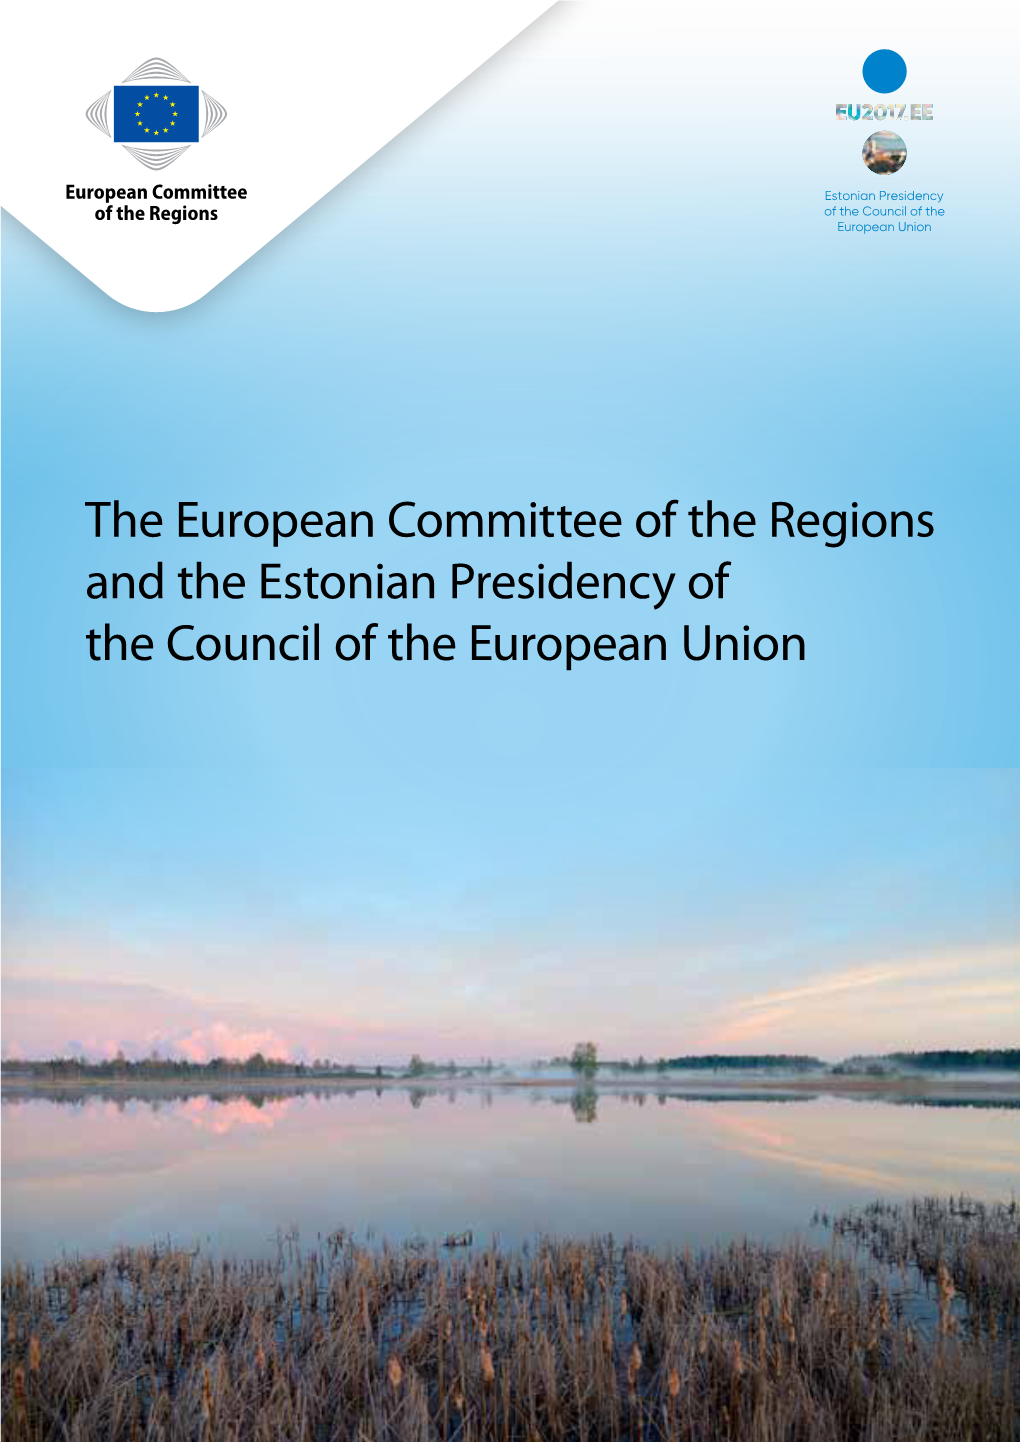 The European Committee of the Regions and the Estonian Presidency of the Council of the European Union